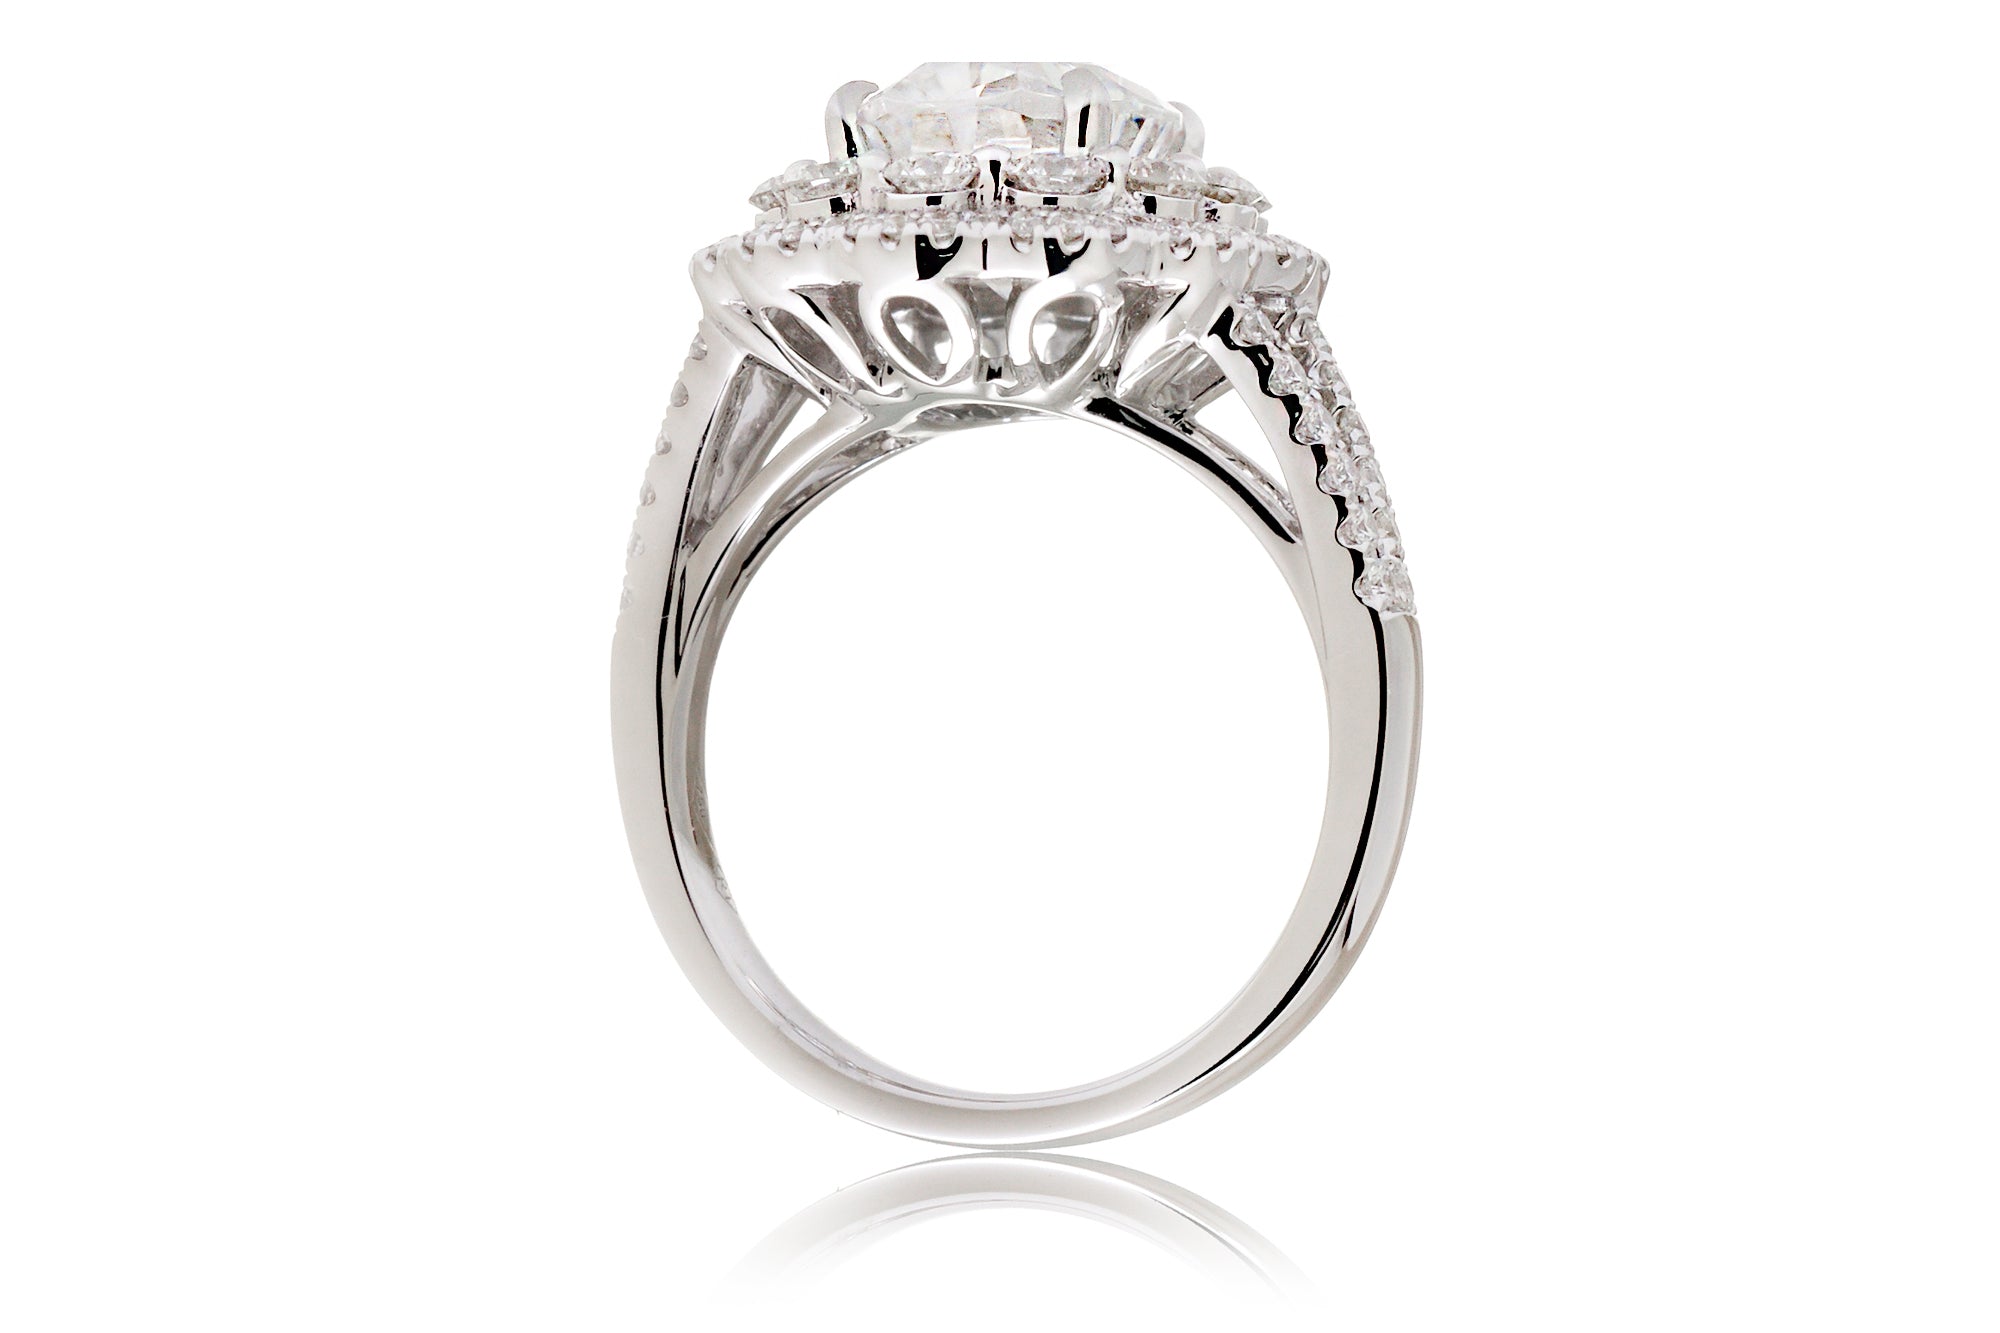 The Constance Oval Moissanite Ring